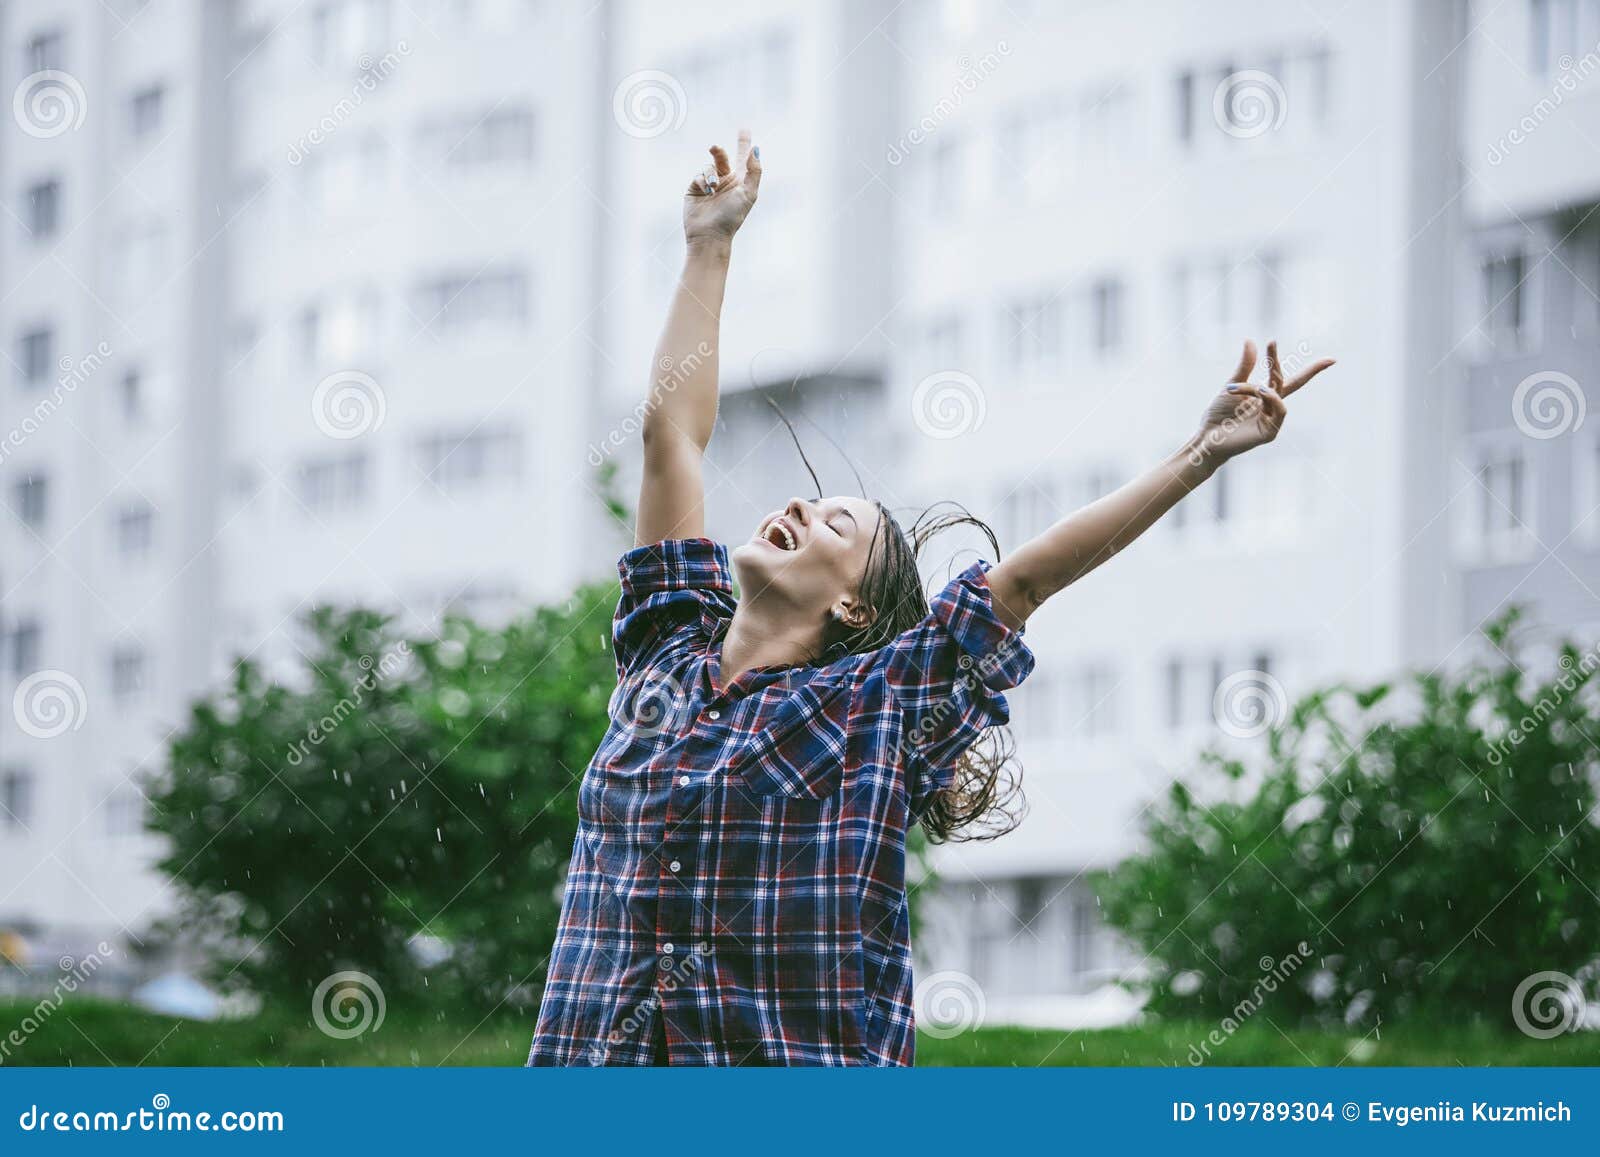 woman happy smiling happiness hands outstretched toward the rain